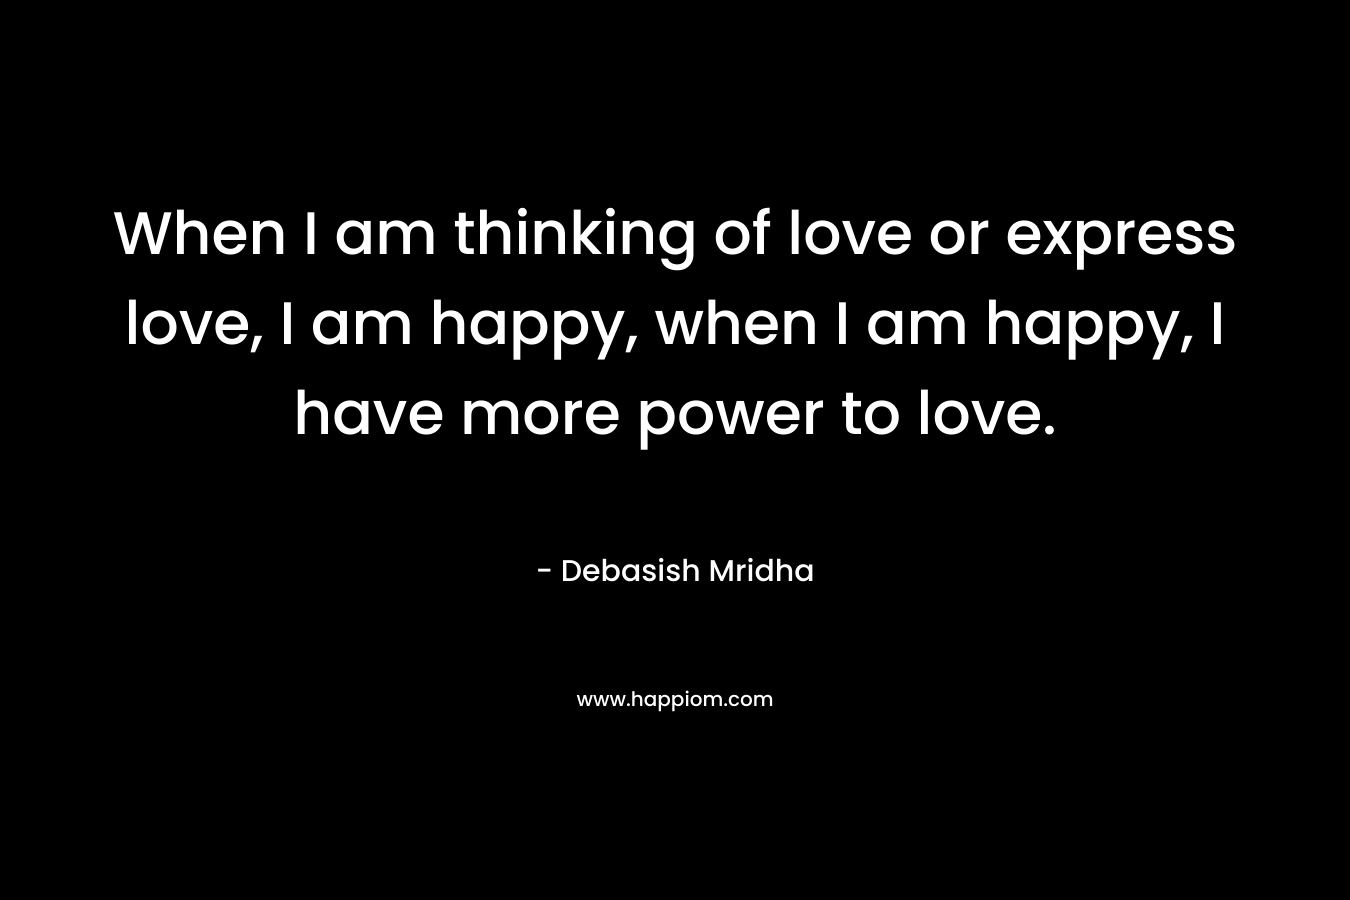 When I am thinking of love or express love, I am happy, when I am happy, I have more power to love.